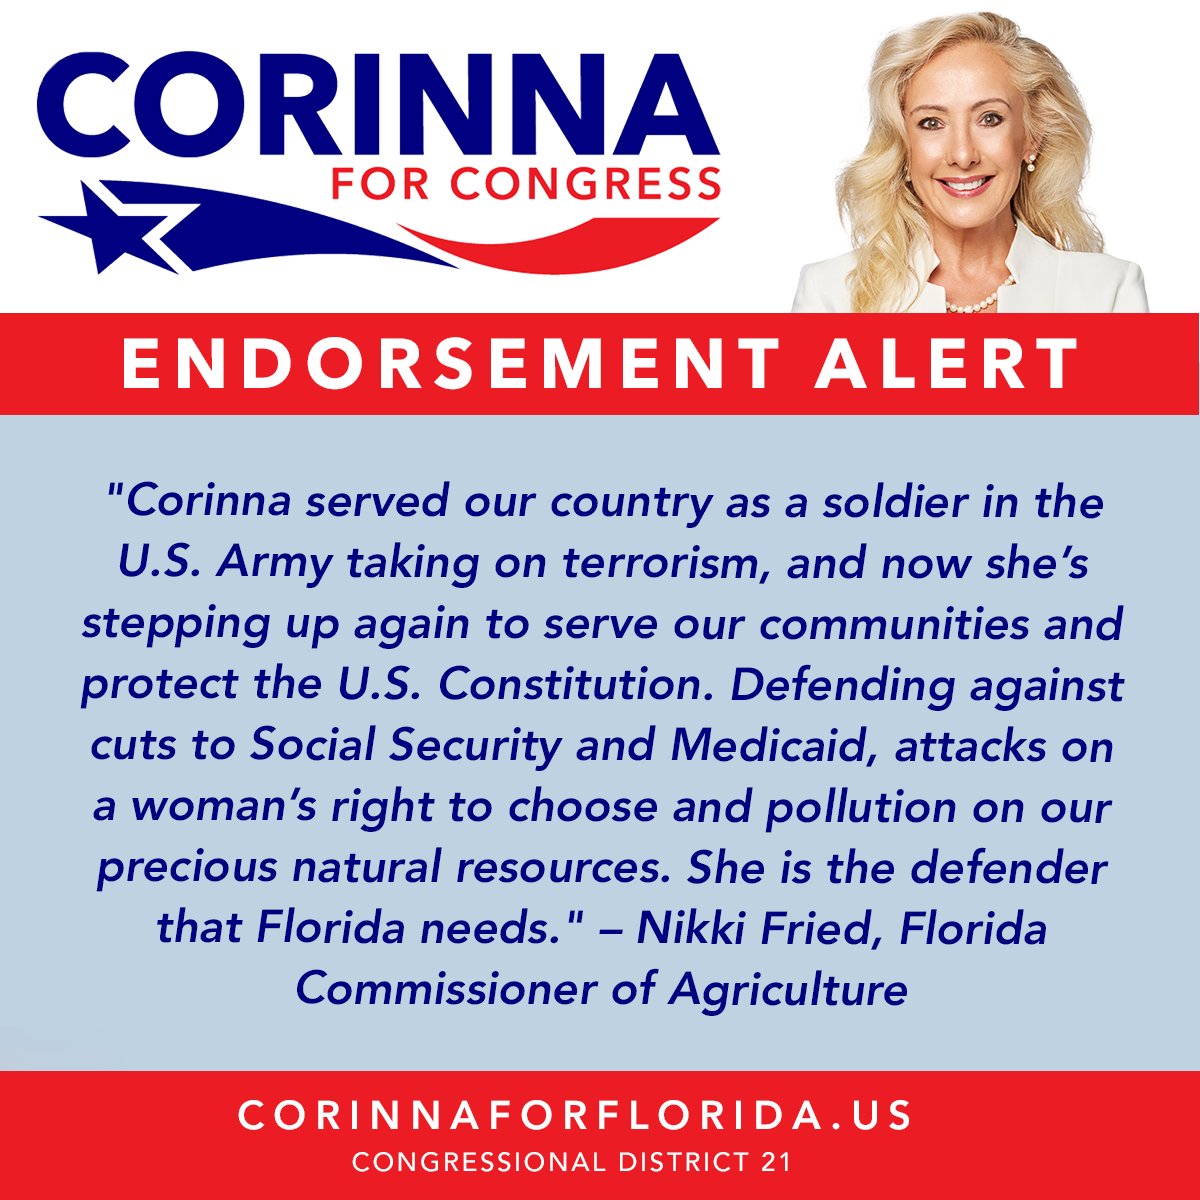 'Corinna is the defender that Florida needs.' – Nikki Fried, Florida Commissioner of Agriculture Thank you for your support, @NikkiFried